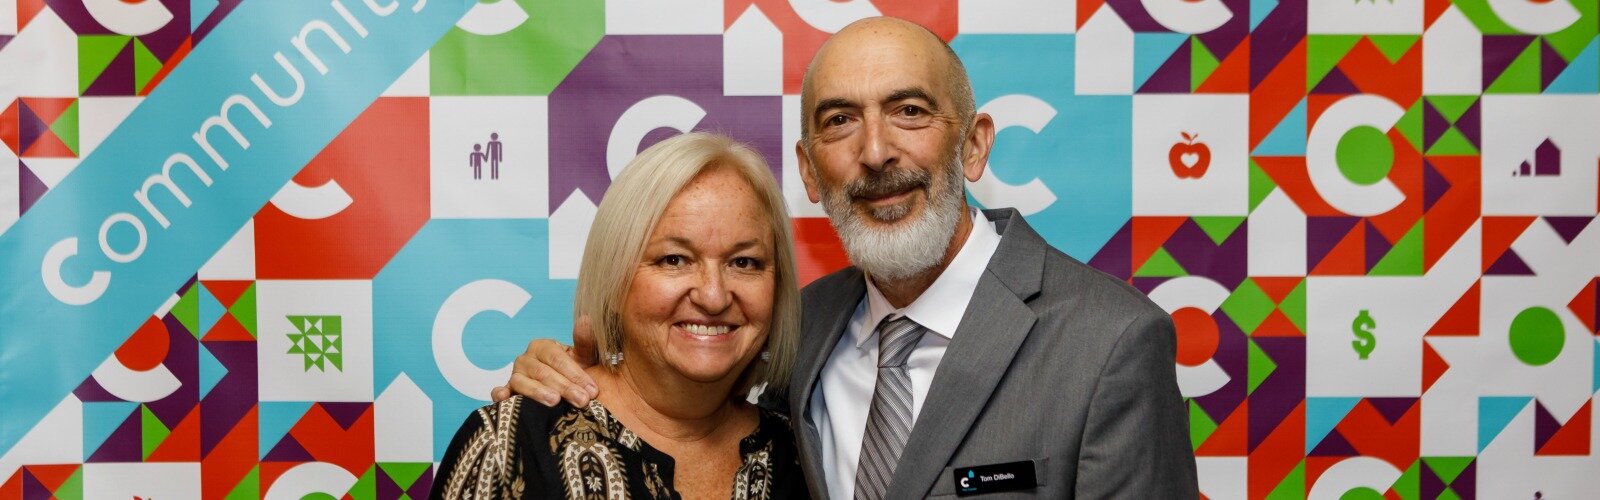 Tom DiBello and his wife, Catherine, at The Center for Great Neighborhoods' annual celebration.